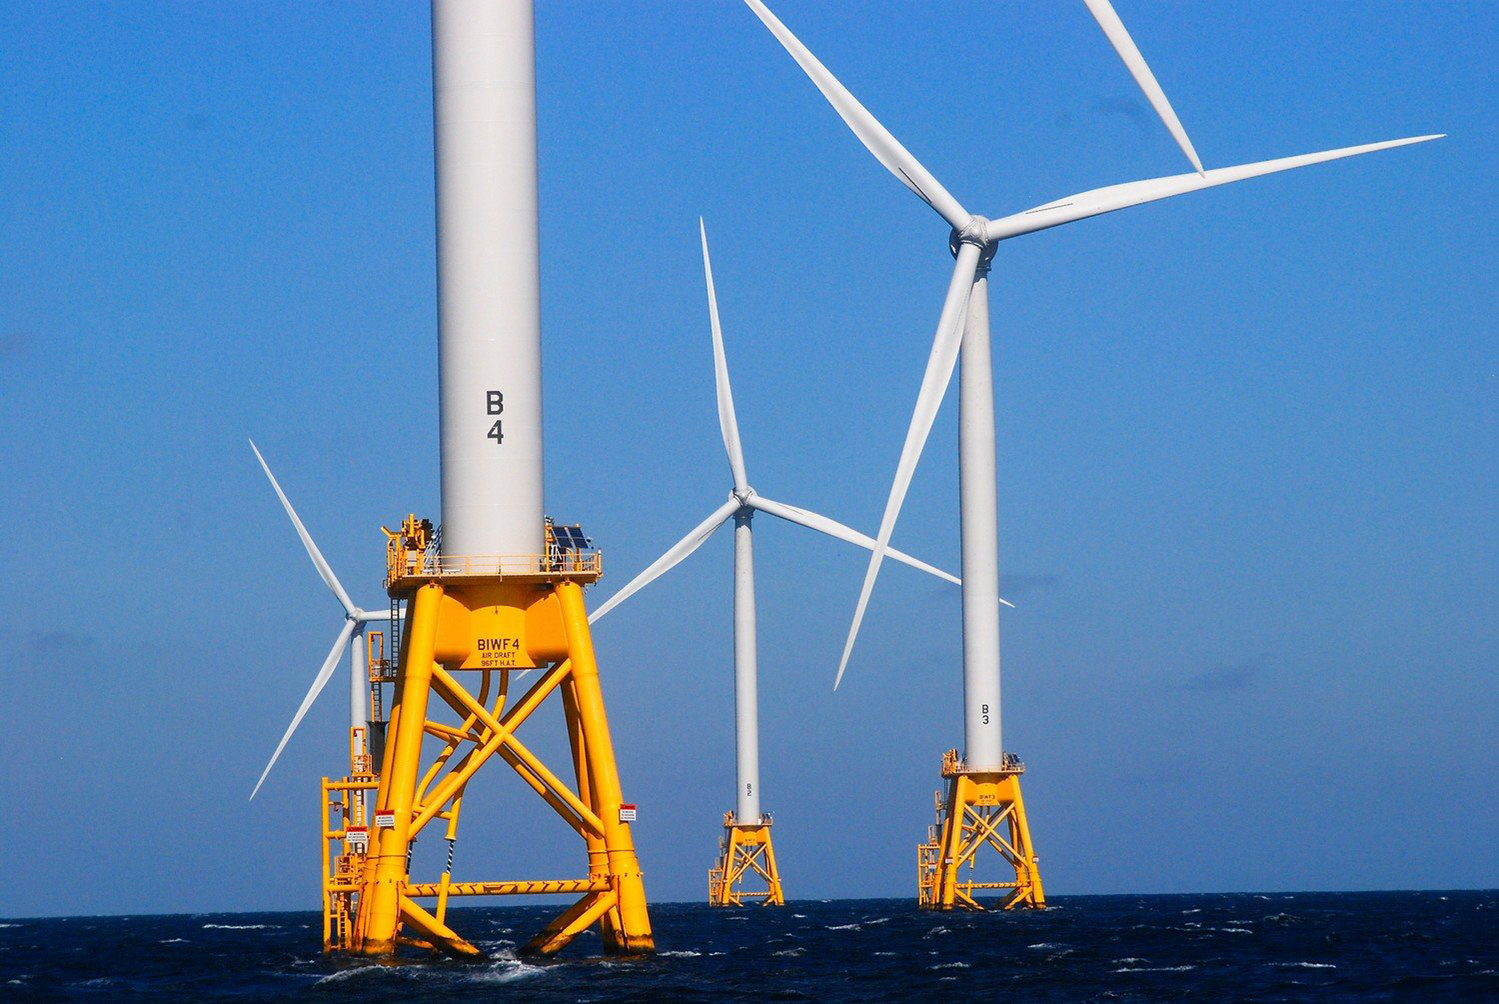 A five-turbine wind farm off the coast of Block Island, R.I., which is serving as a model for future development. According to the benchmarks set by the act, by 2030 New York would have to get 70 percent of its electricity from renewable resources such as wind.